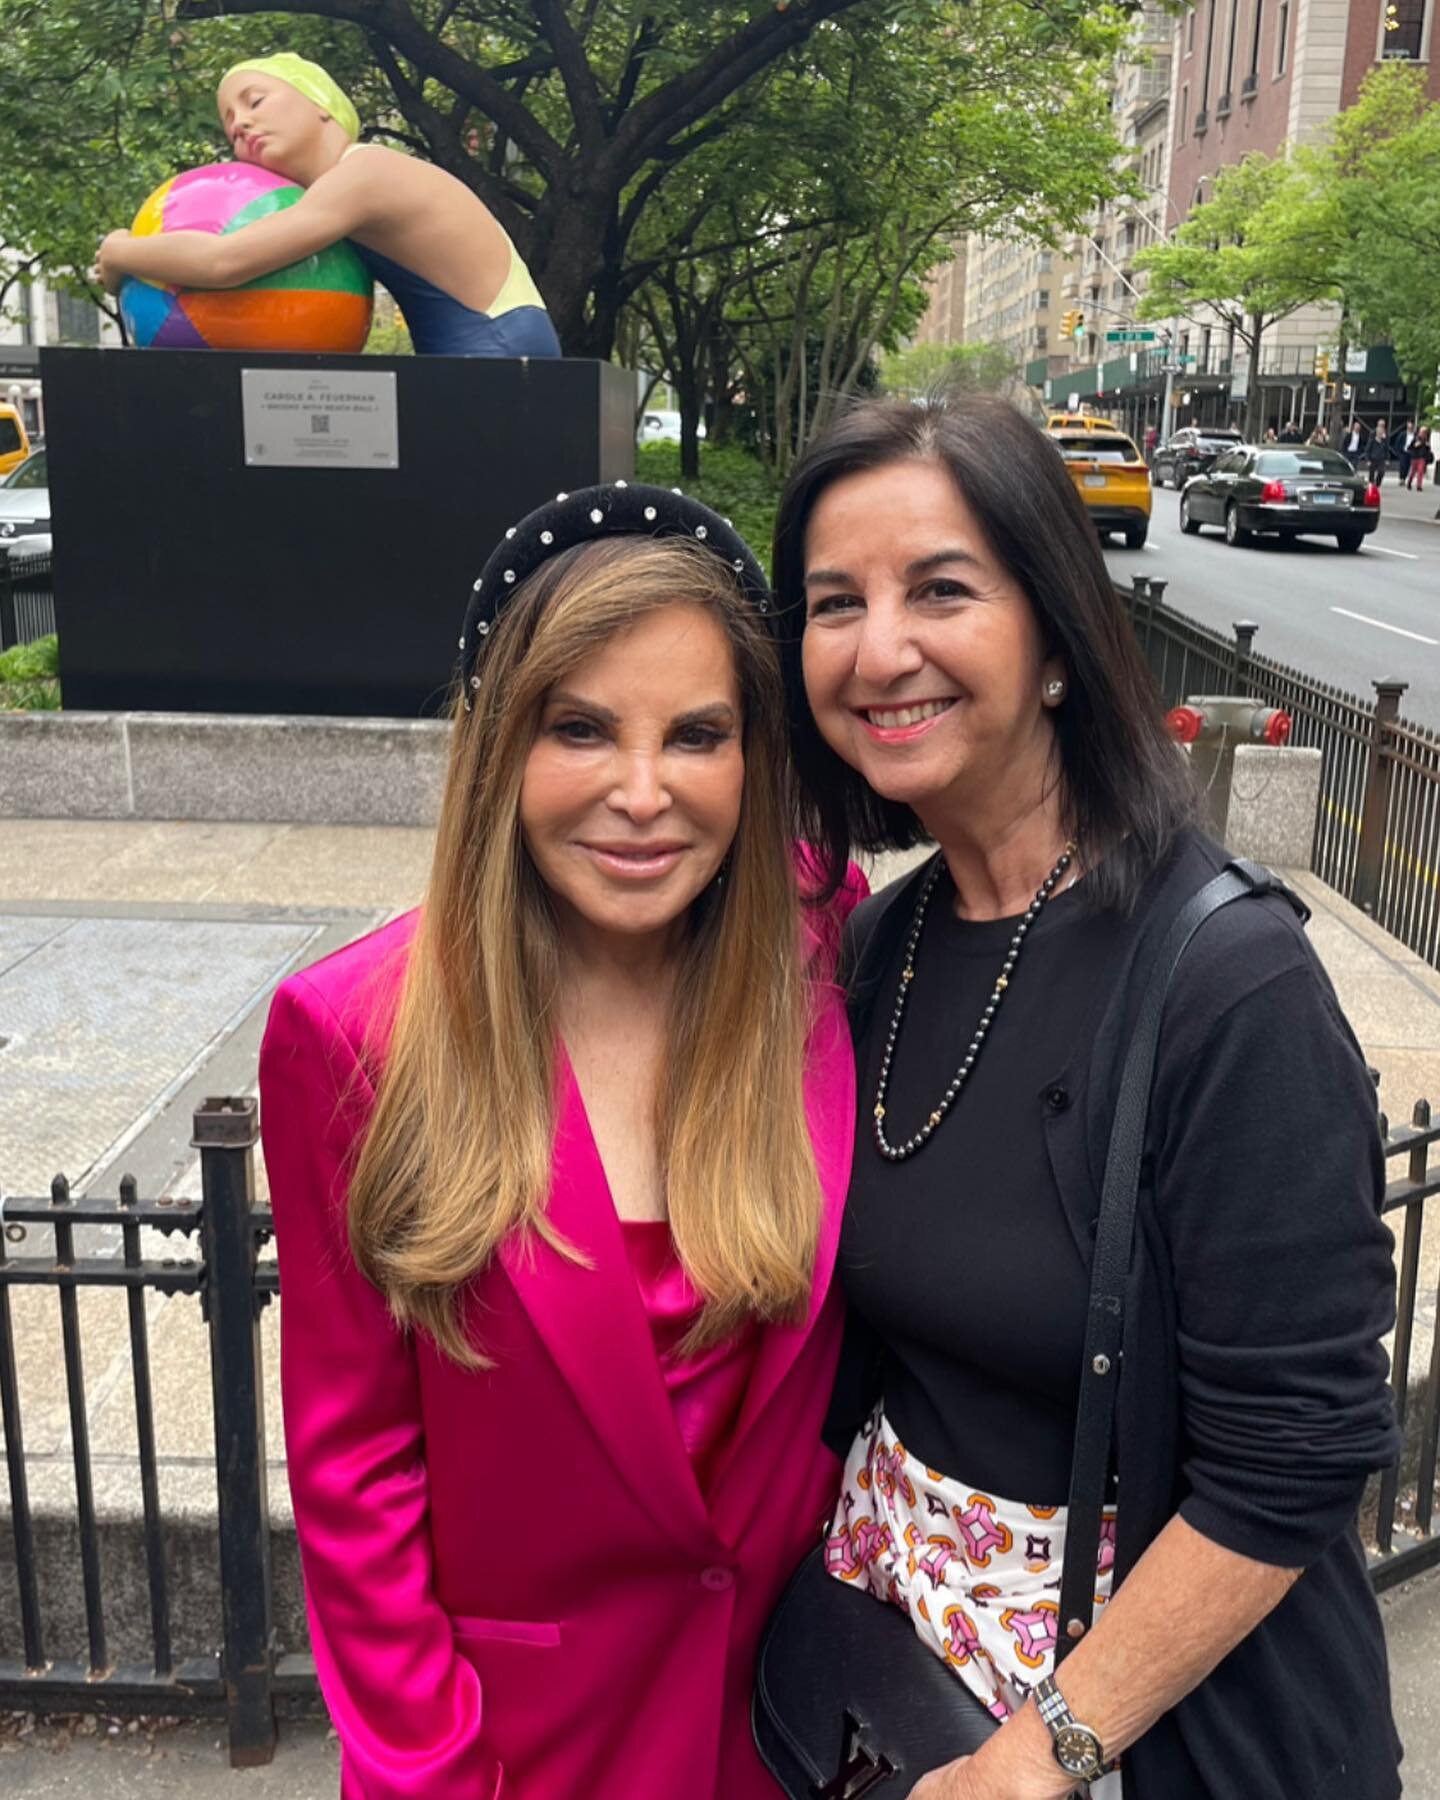 TodY a went tonNY to share a special moment with the wonderful artist and friend Carole Feuerman who is unveiling nine of her monumental sculptures in Park Av NY . What a scene here is a pick of some of the sculptures.
 I am also with Biba Lacroix a 